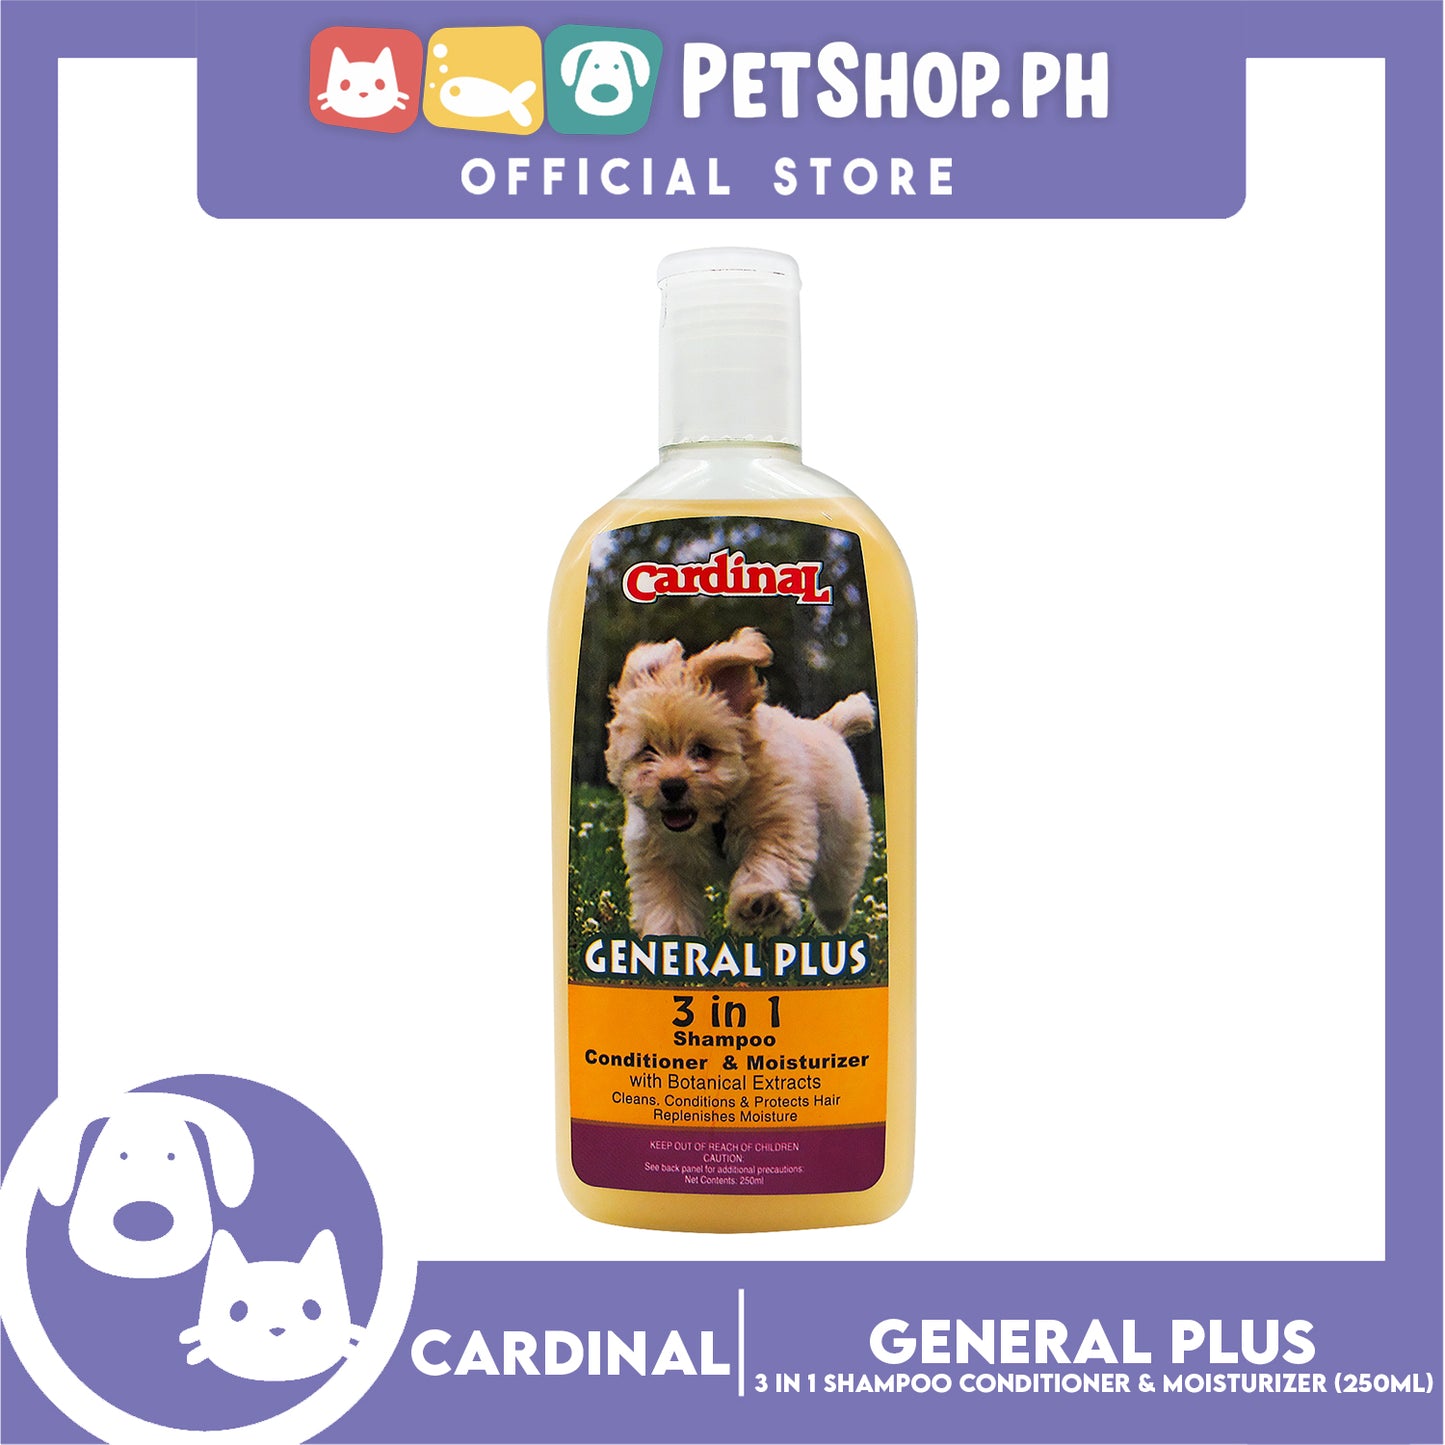 Cardinal General Plus 3 in 1 Shampoo, Conditioner and Moisturizer 250ml For Dogs and Cats